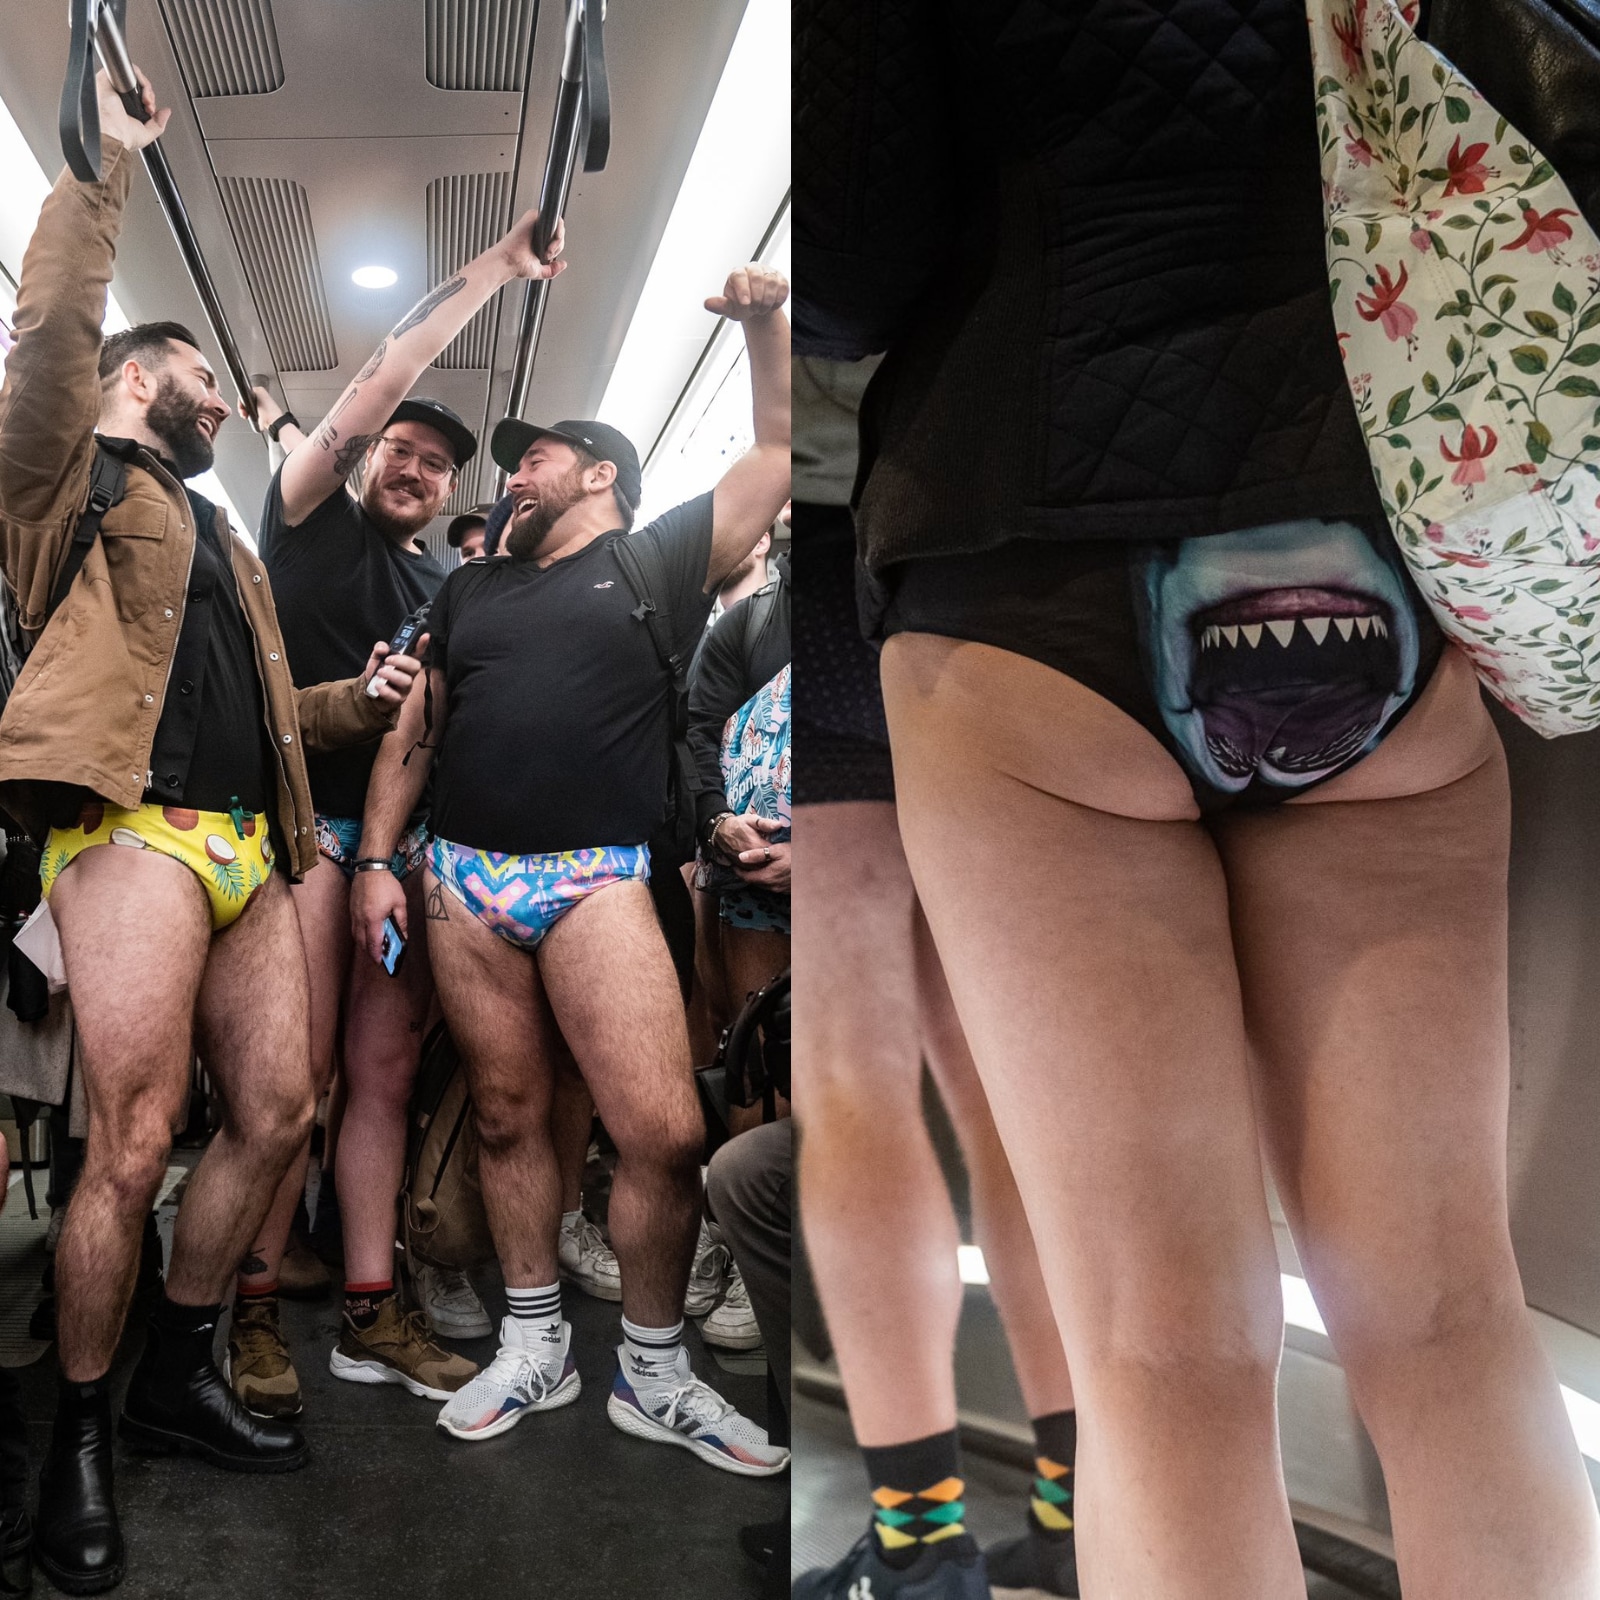 No Trousers Tube Ride Day मटर म नगधडग भड क तसवर वयरल   People travel without pants for No Trousers Tube Ride Day in London pics  viral  News Nation